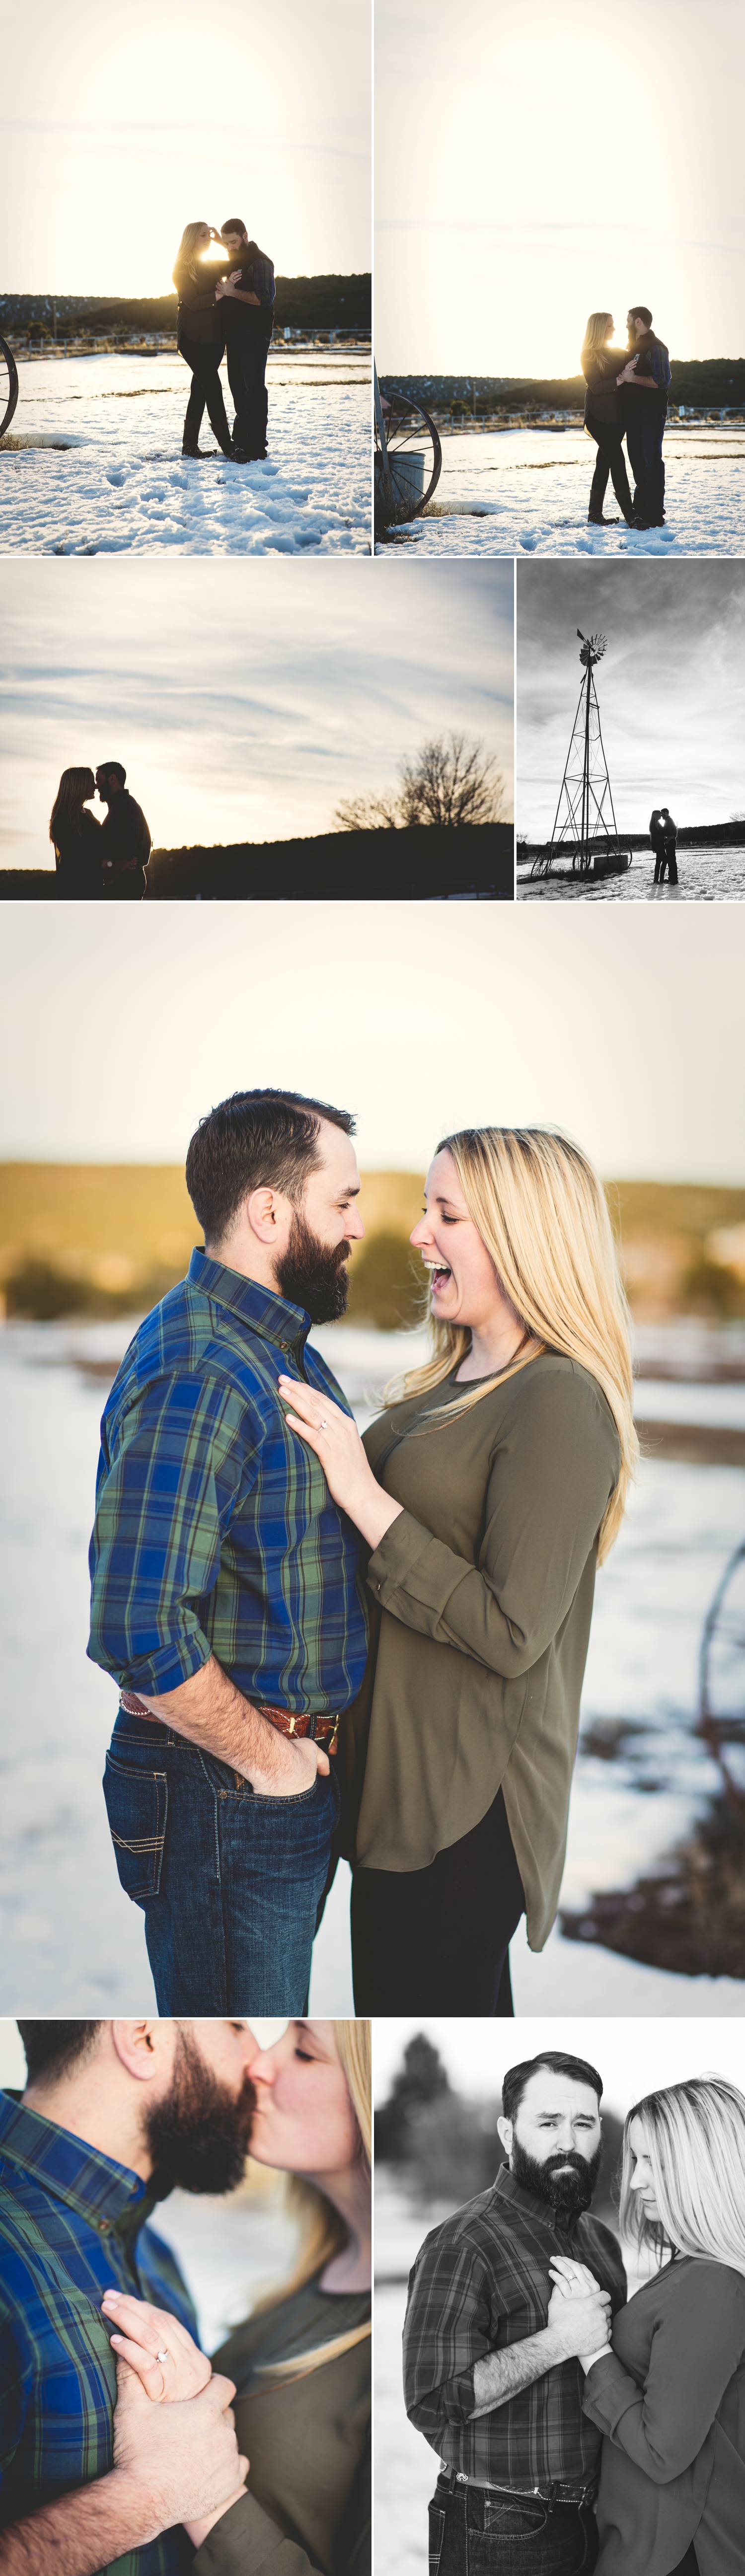 New Mexico Engagment Photography 6.jpg